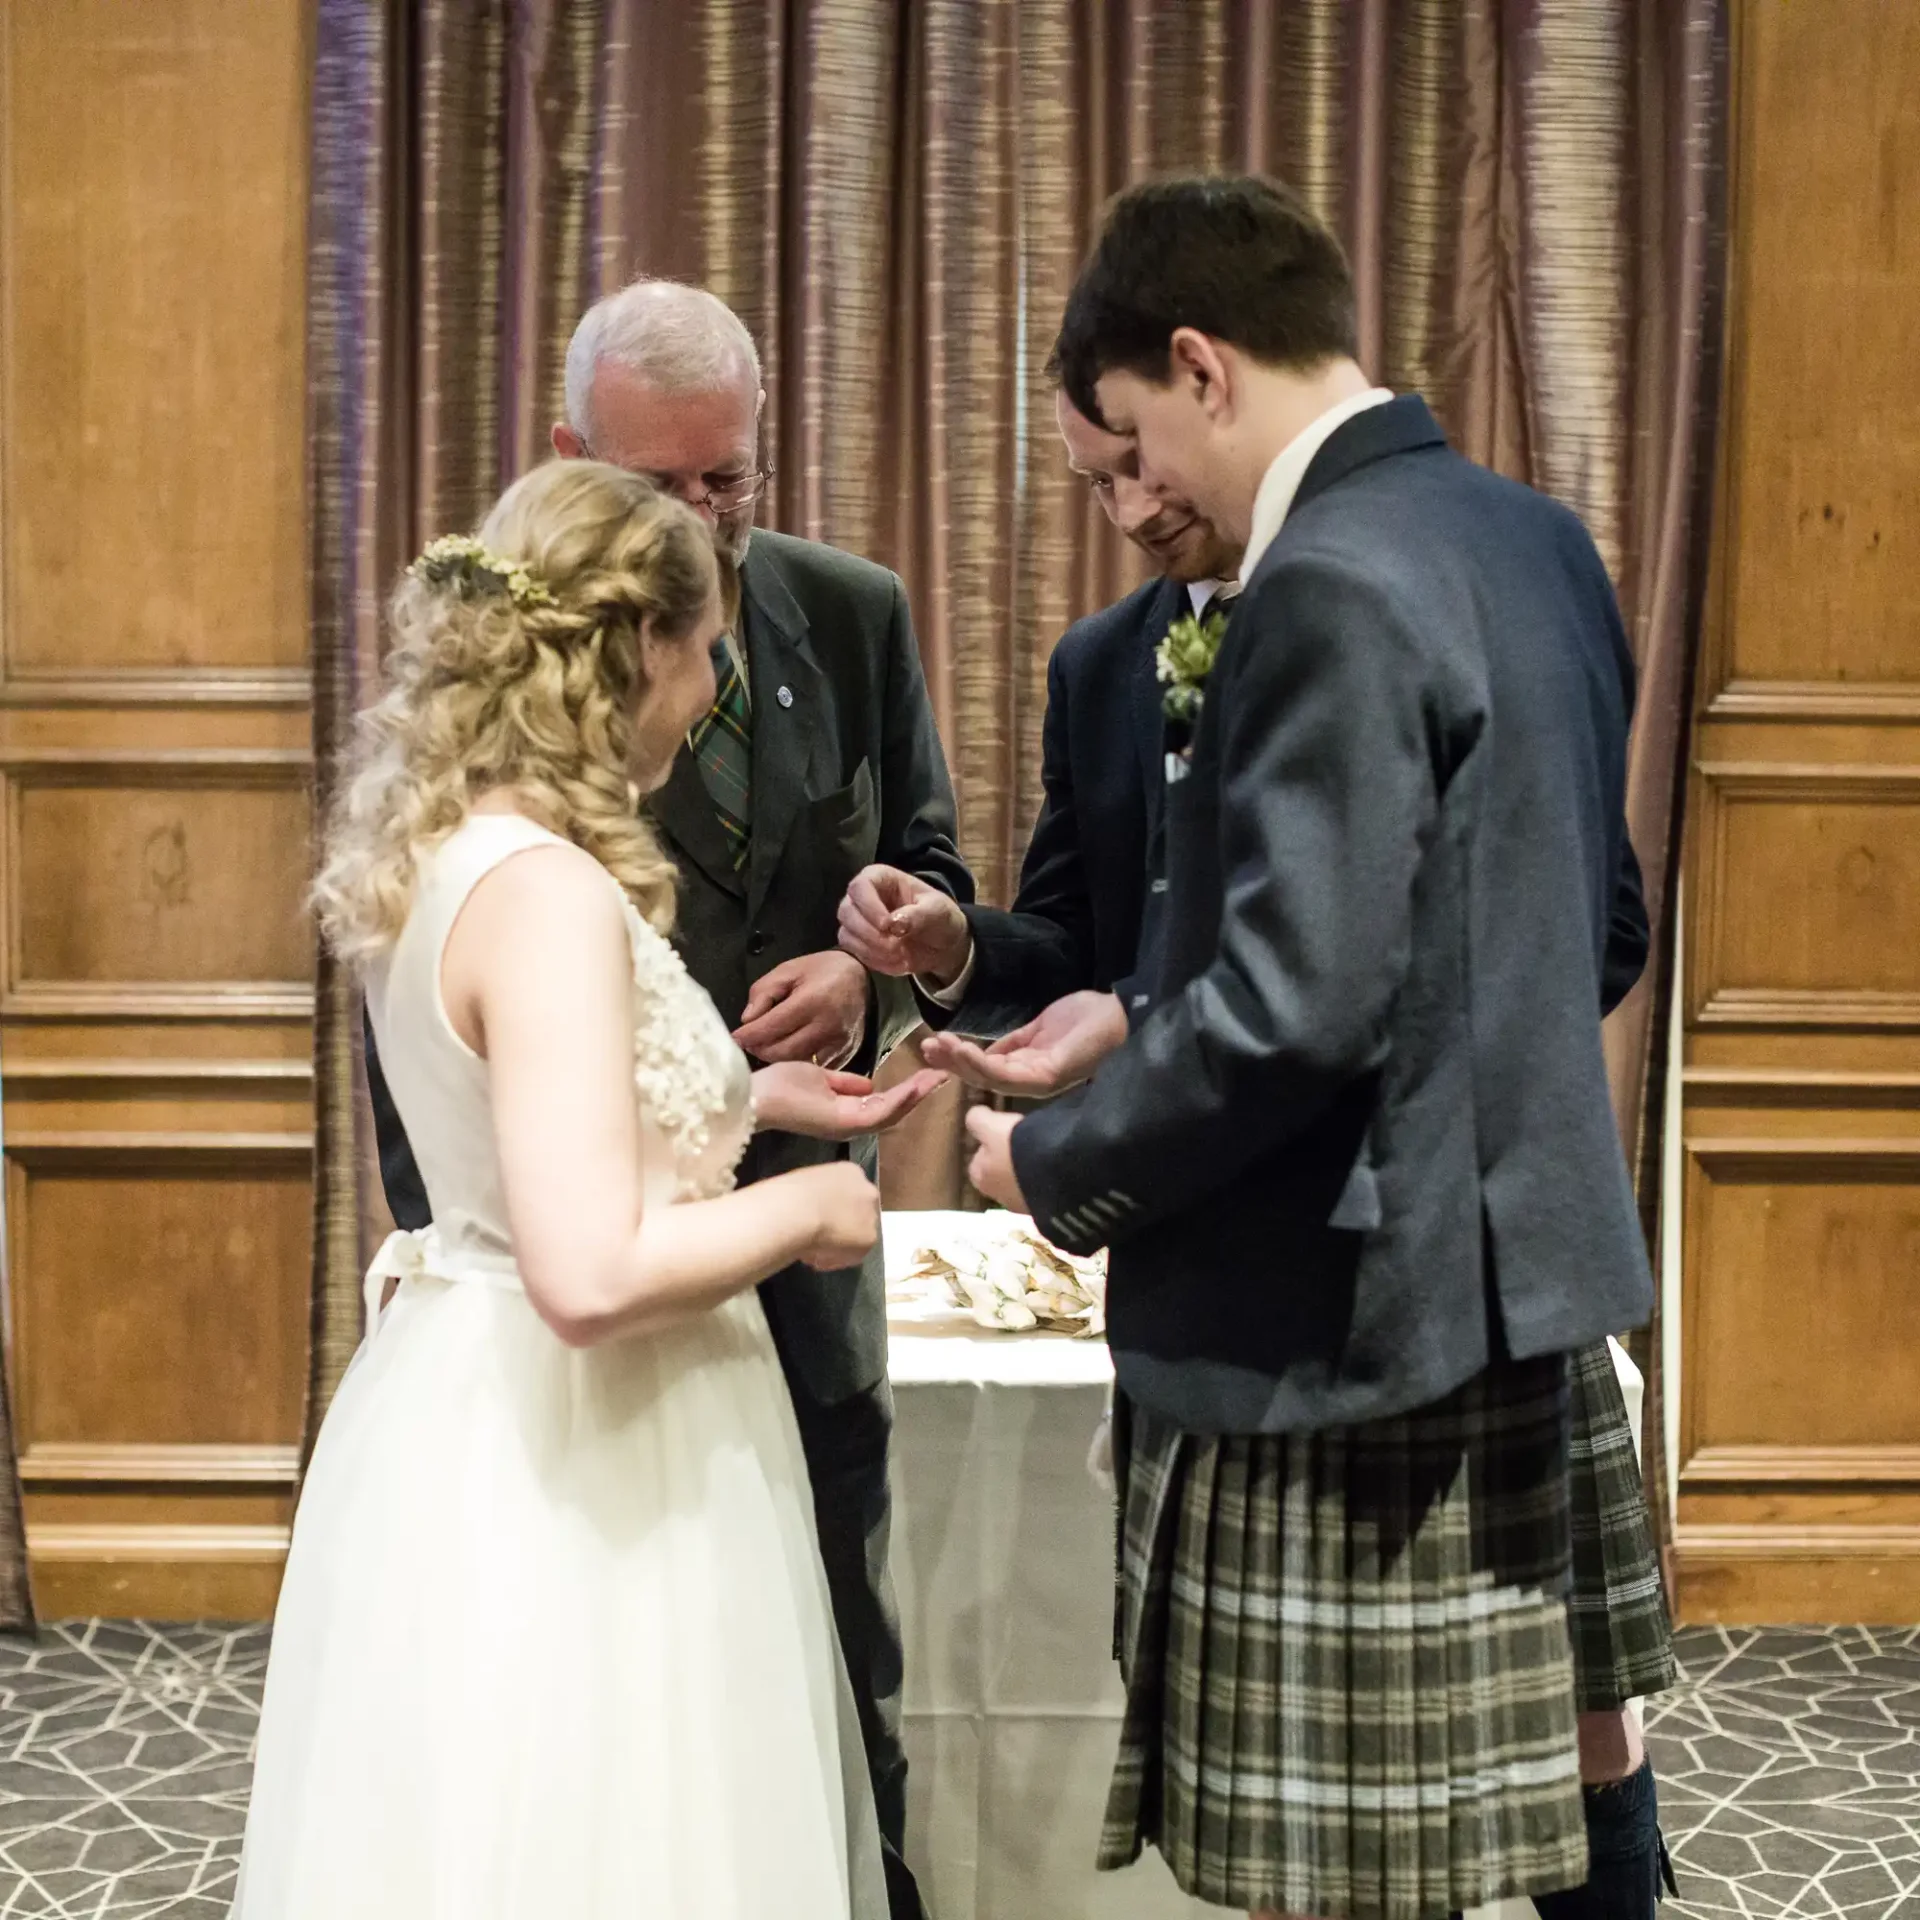 A bride and groom cut their wedding cake as an older man watches, with the groom wearing a kilt and the bride in a white dress.